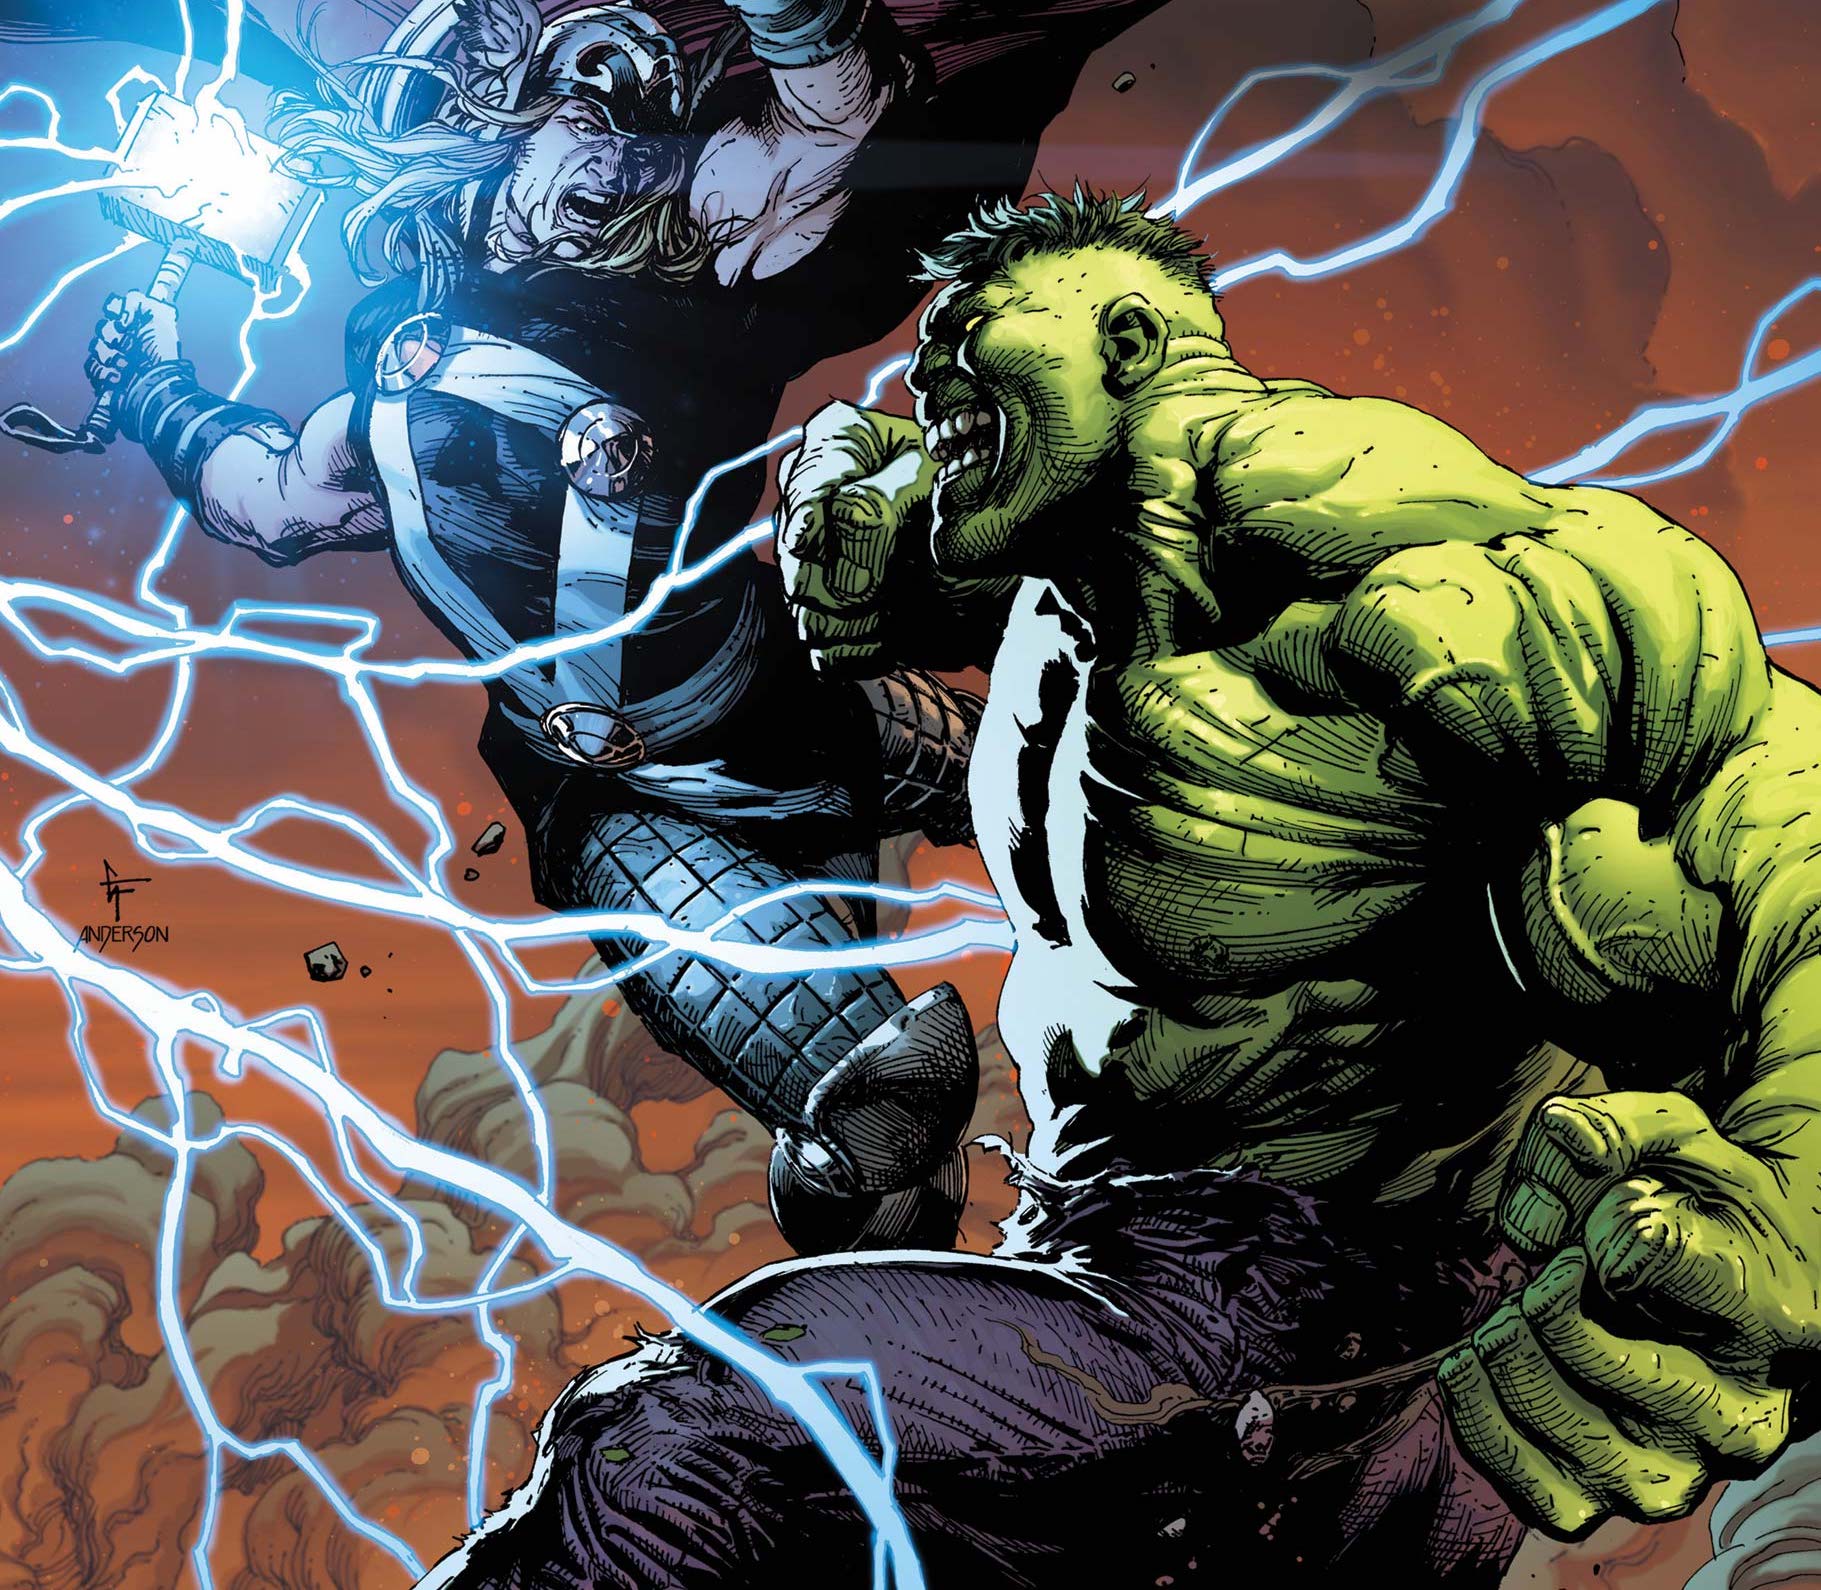 'Hulk vs. Thor: Banner of War Alpha' #1 is a good jumping-on point